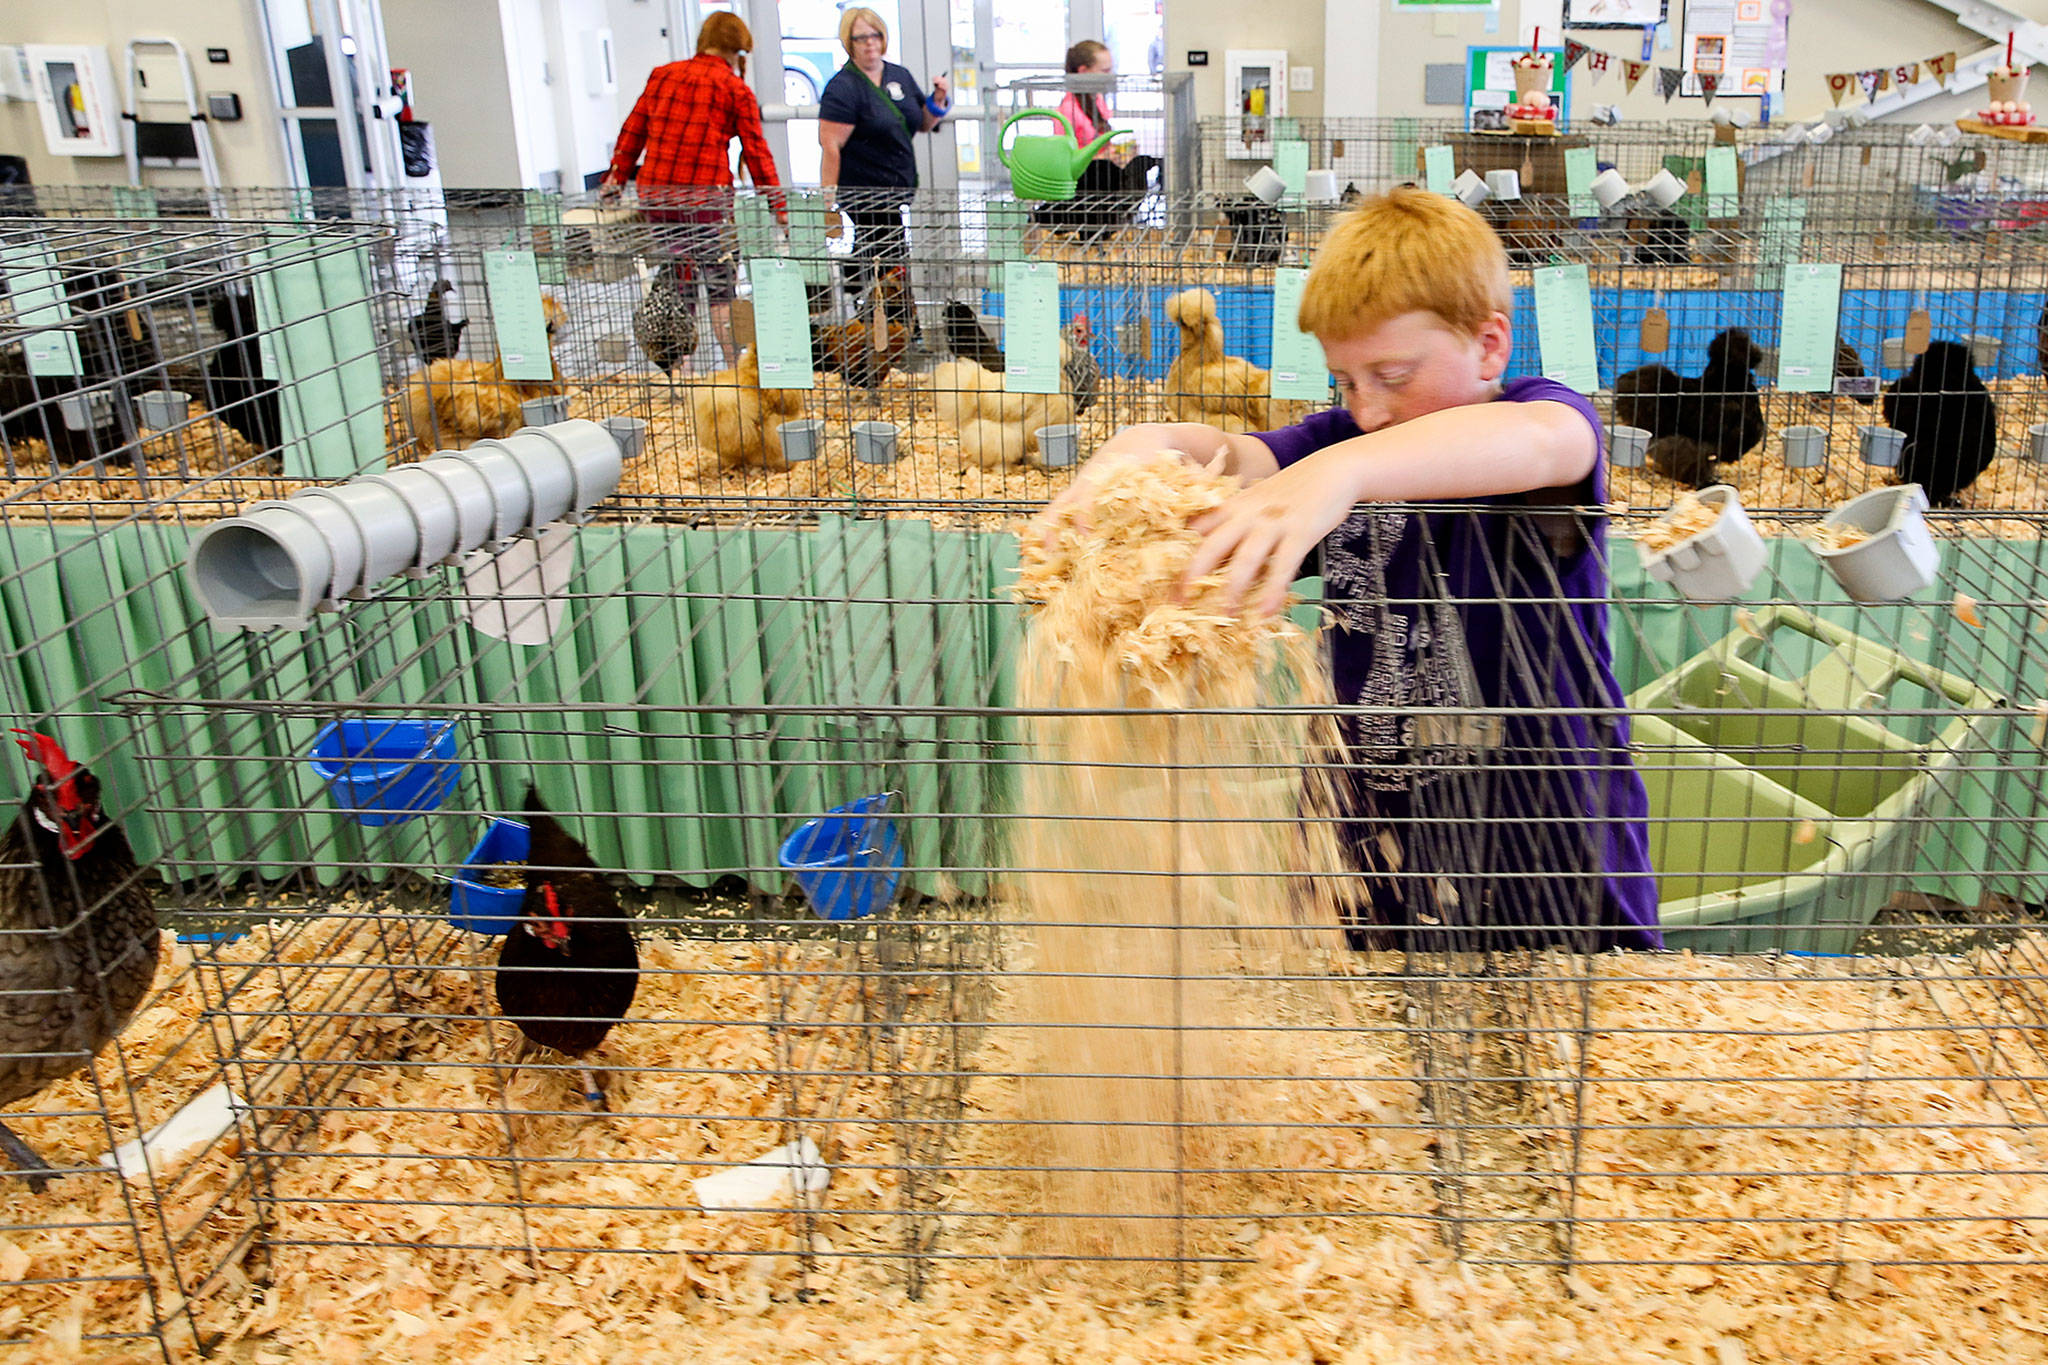 Orion Liedtke spreads wood shavings Wednesday afternoon at the Evergreen State Fairgrounds in Monroe. (Kevin Clark / The Herald)